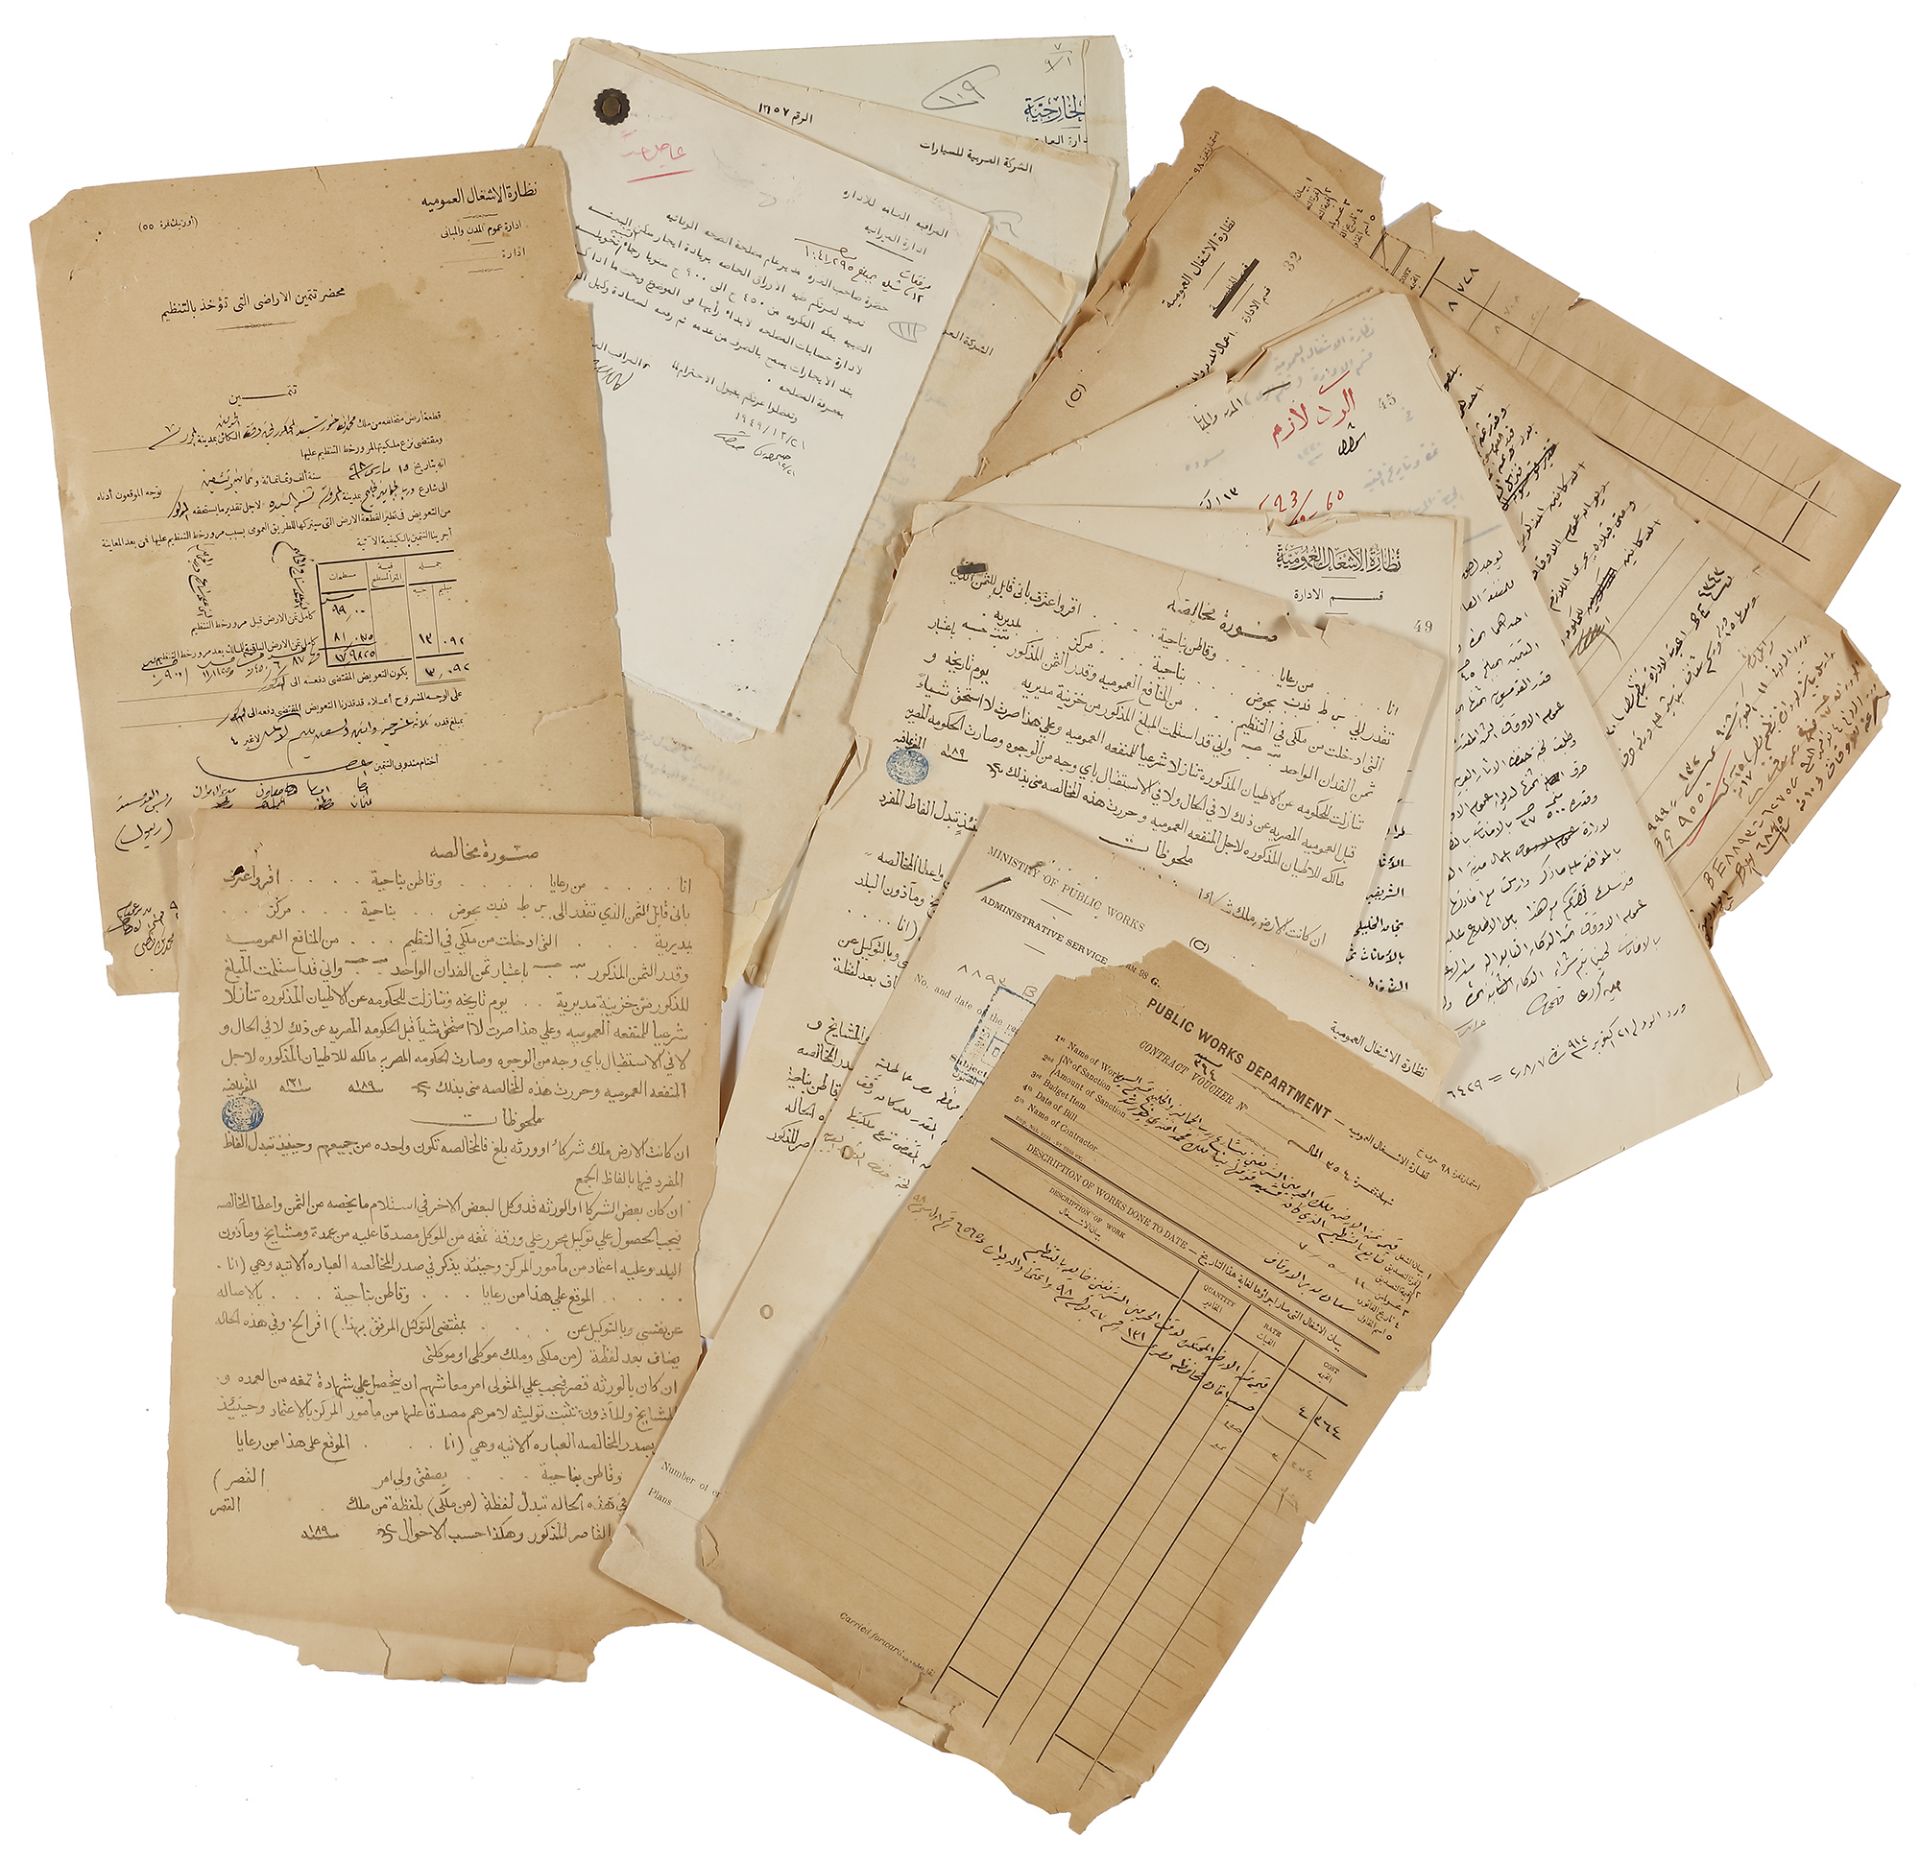 A SET OF DIFFERENT DOCUMENTS, CONTRACTS, RECEIPTS AND SETTLEMENTS, OF THE HIJAZ REGION, ESPECIALLY M